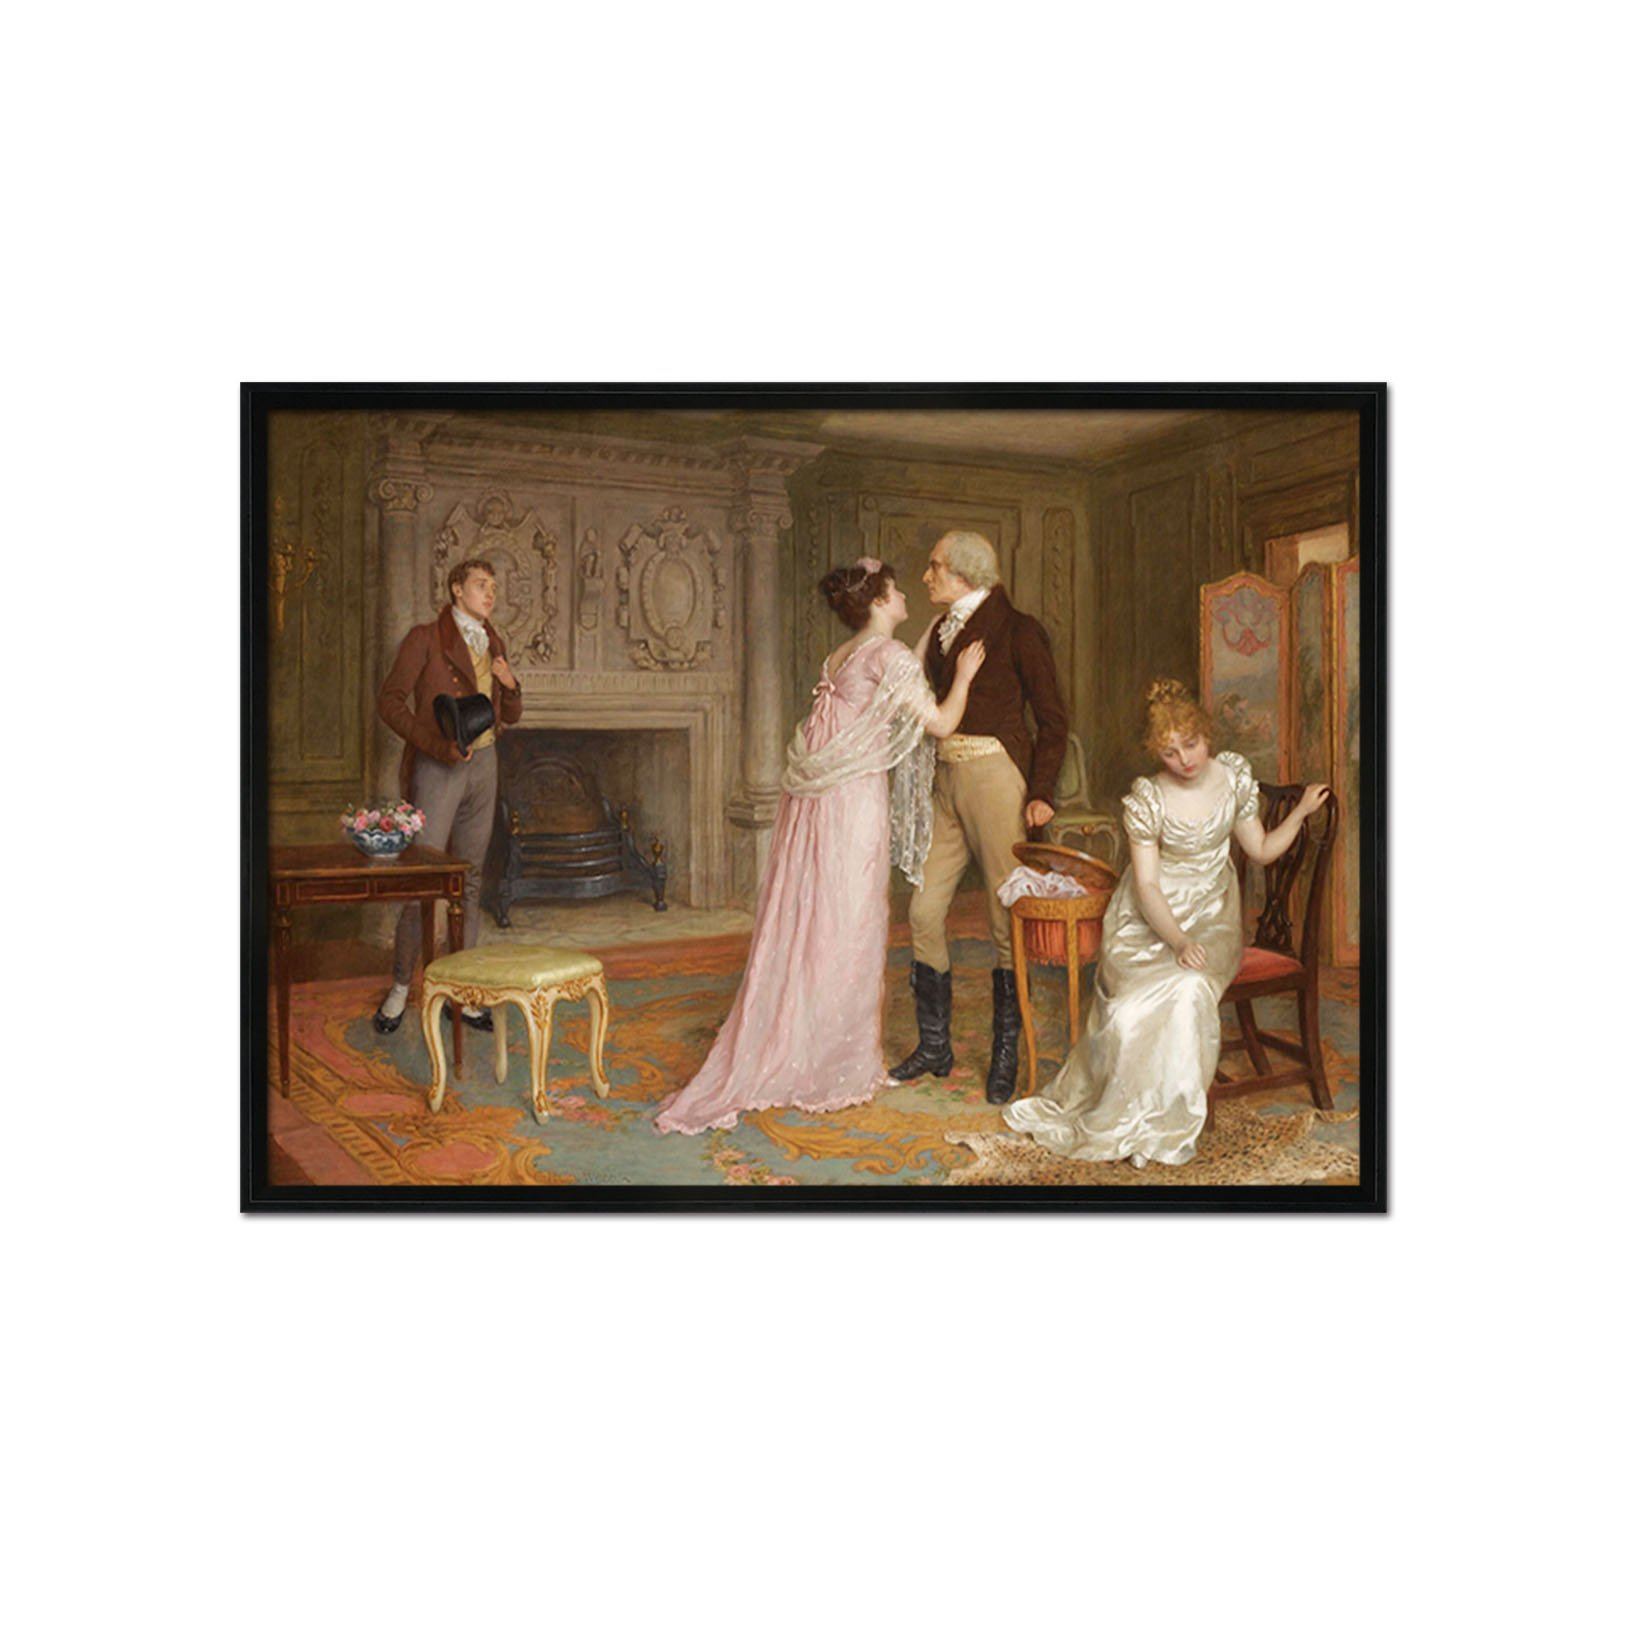 3D Reluctantly Parting 049 Fake Framed Print Painting Wallpaper AJ Creativity Home 